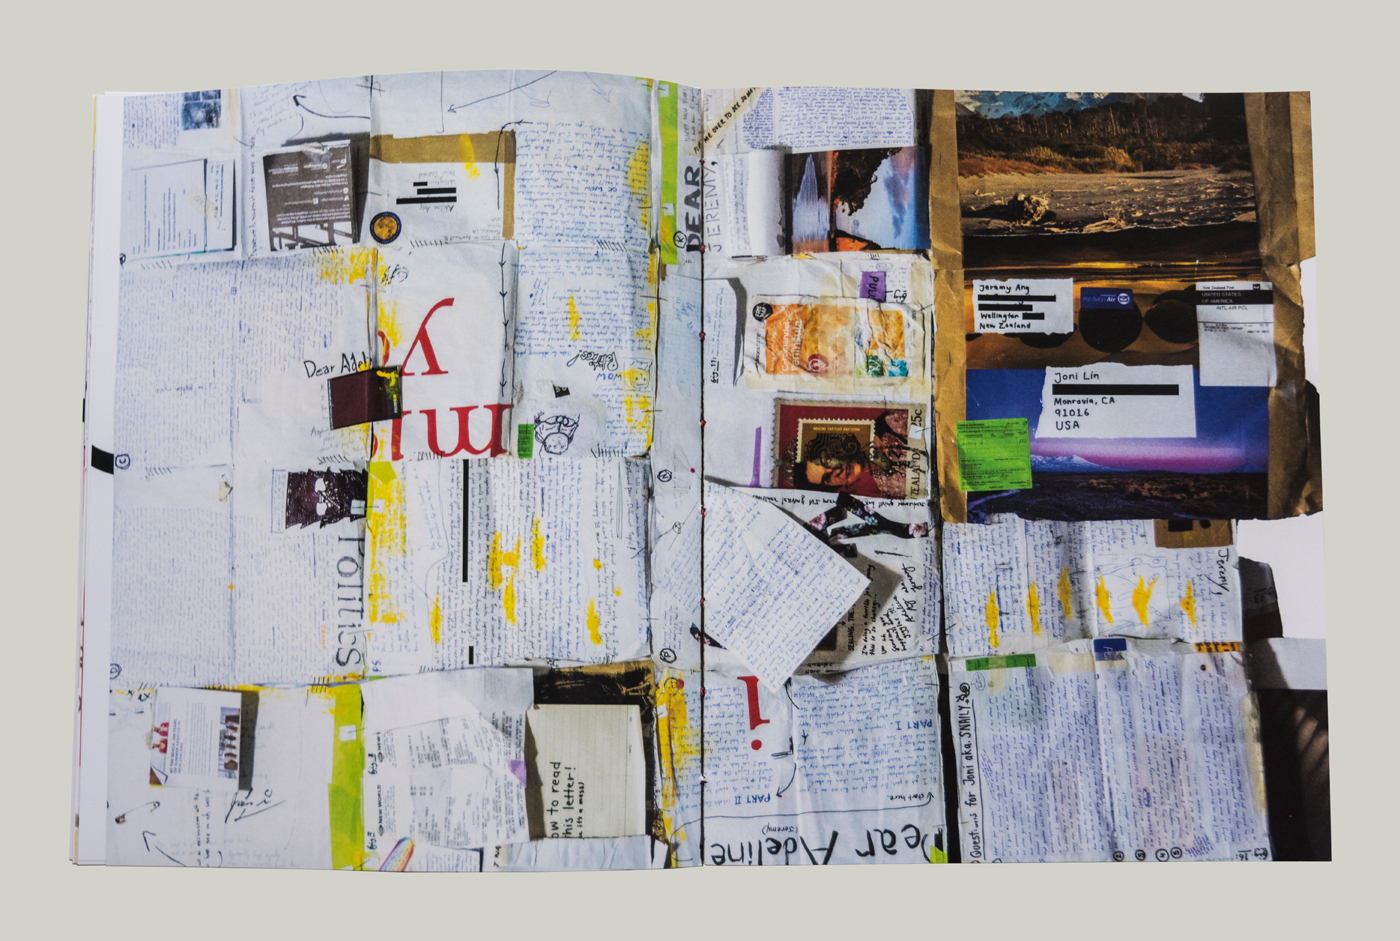 An interior spread showcasing the ninth letter of The 10 Letters Project. Countless pieces of paper nad hand written notes are collaged like a quilt across the entire spread.